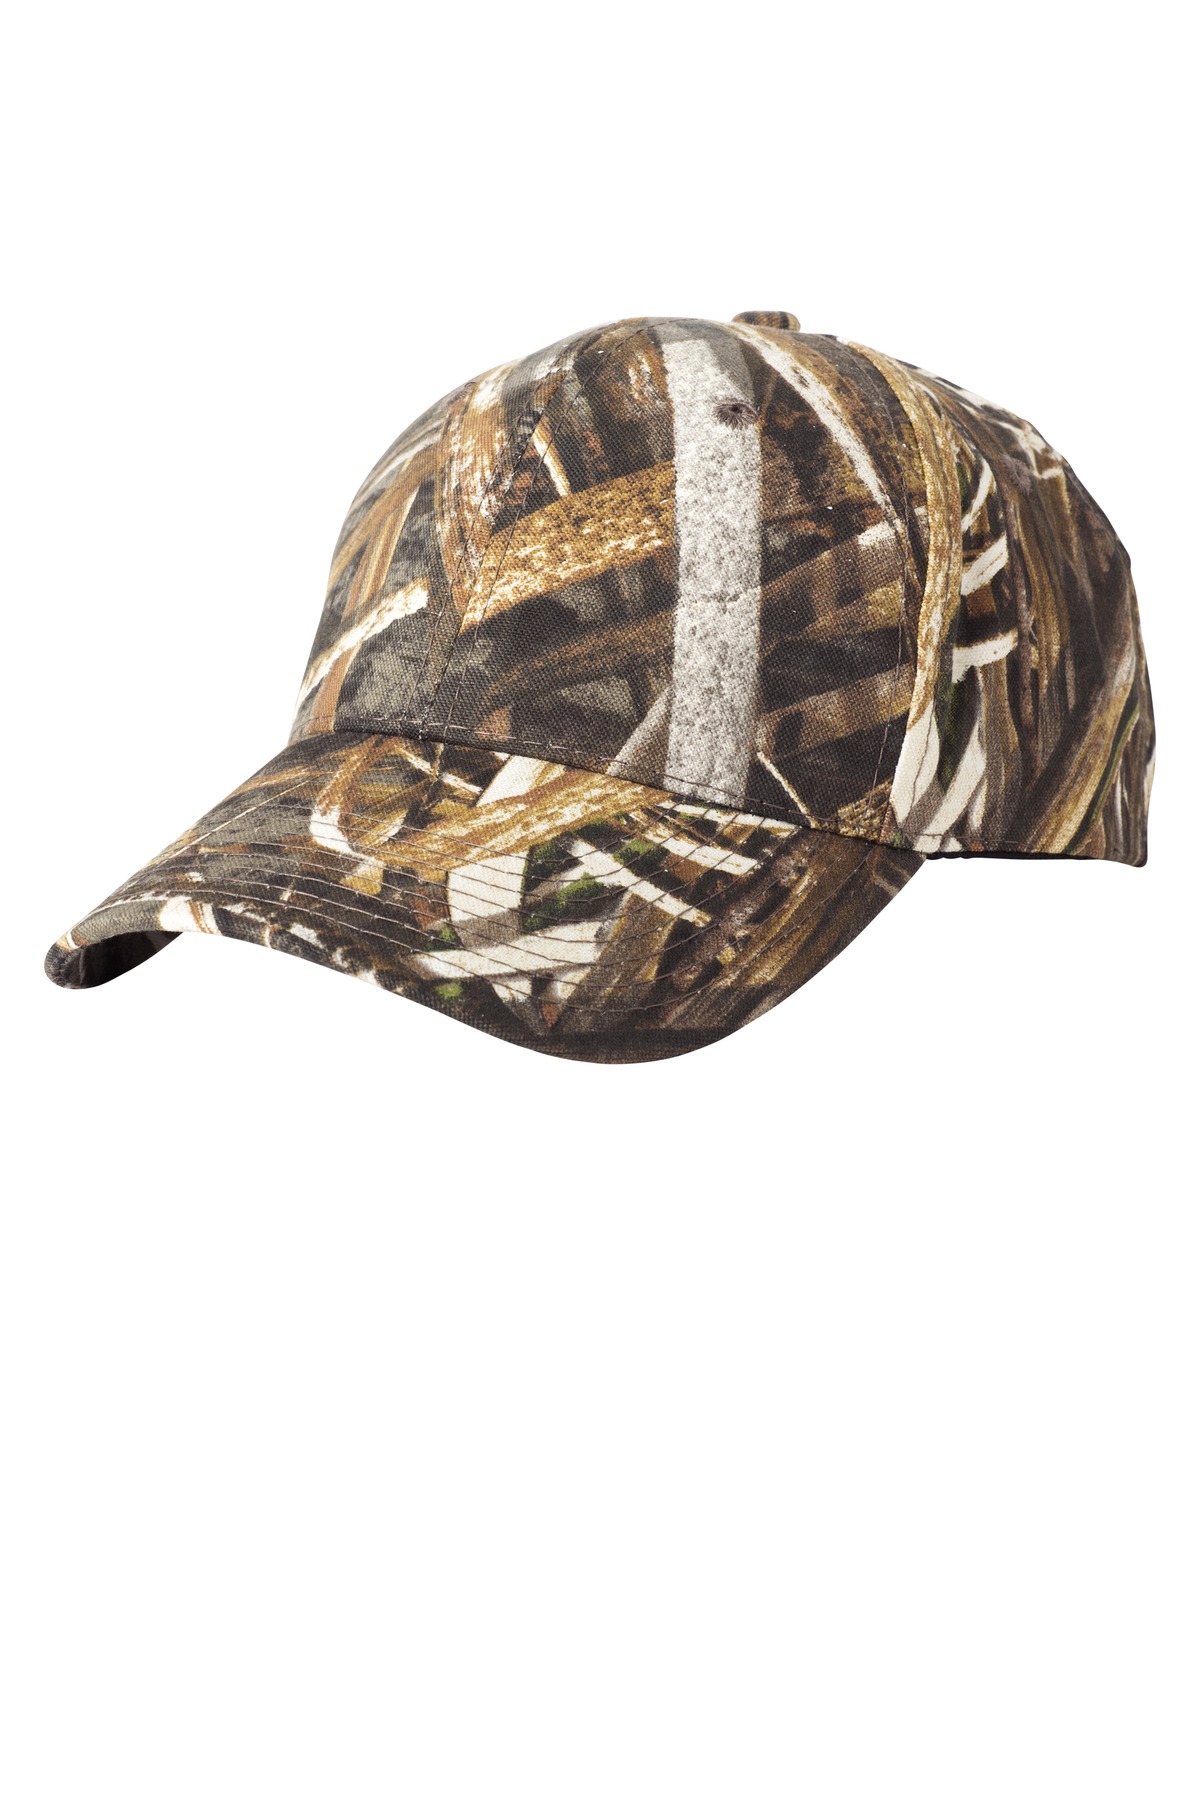 Selected Color is Realtree Max 5